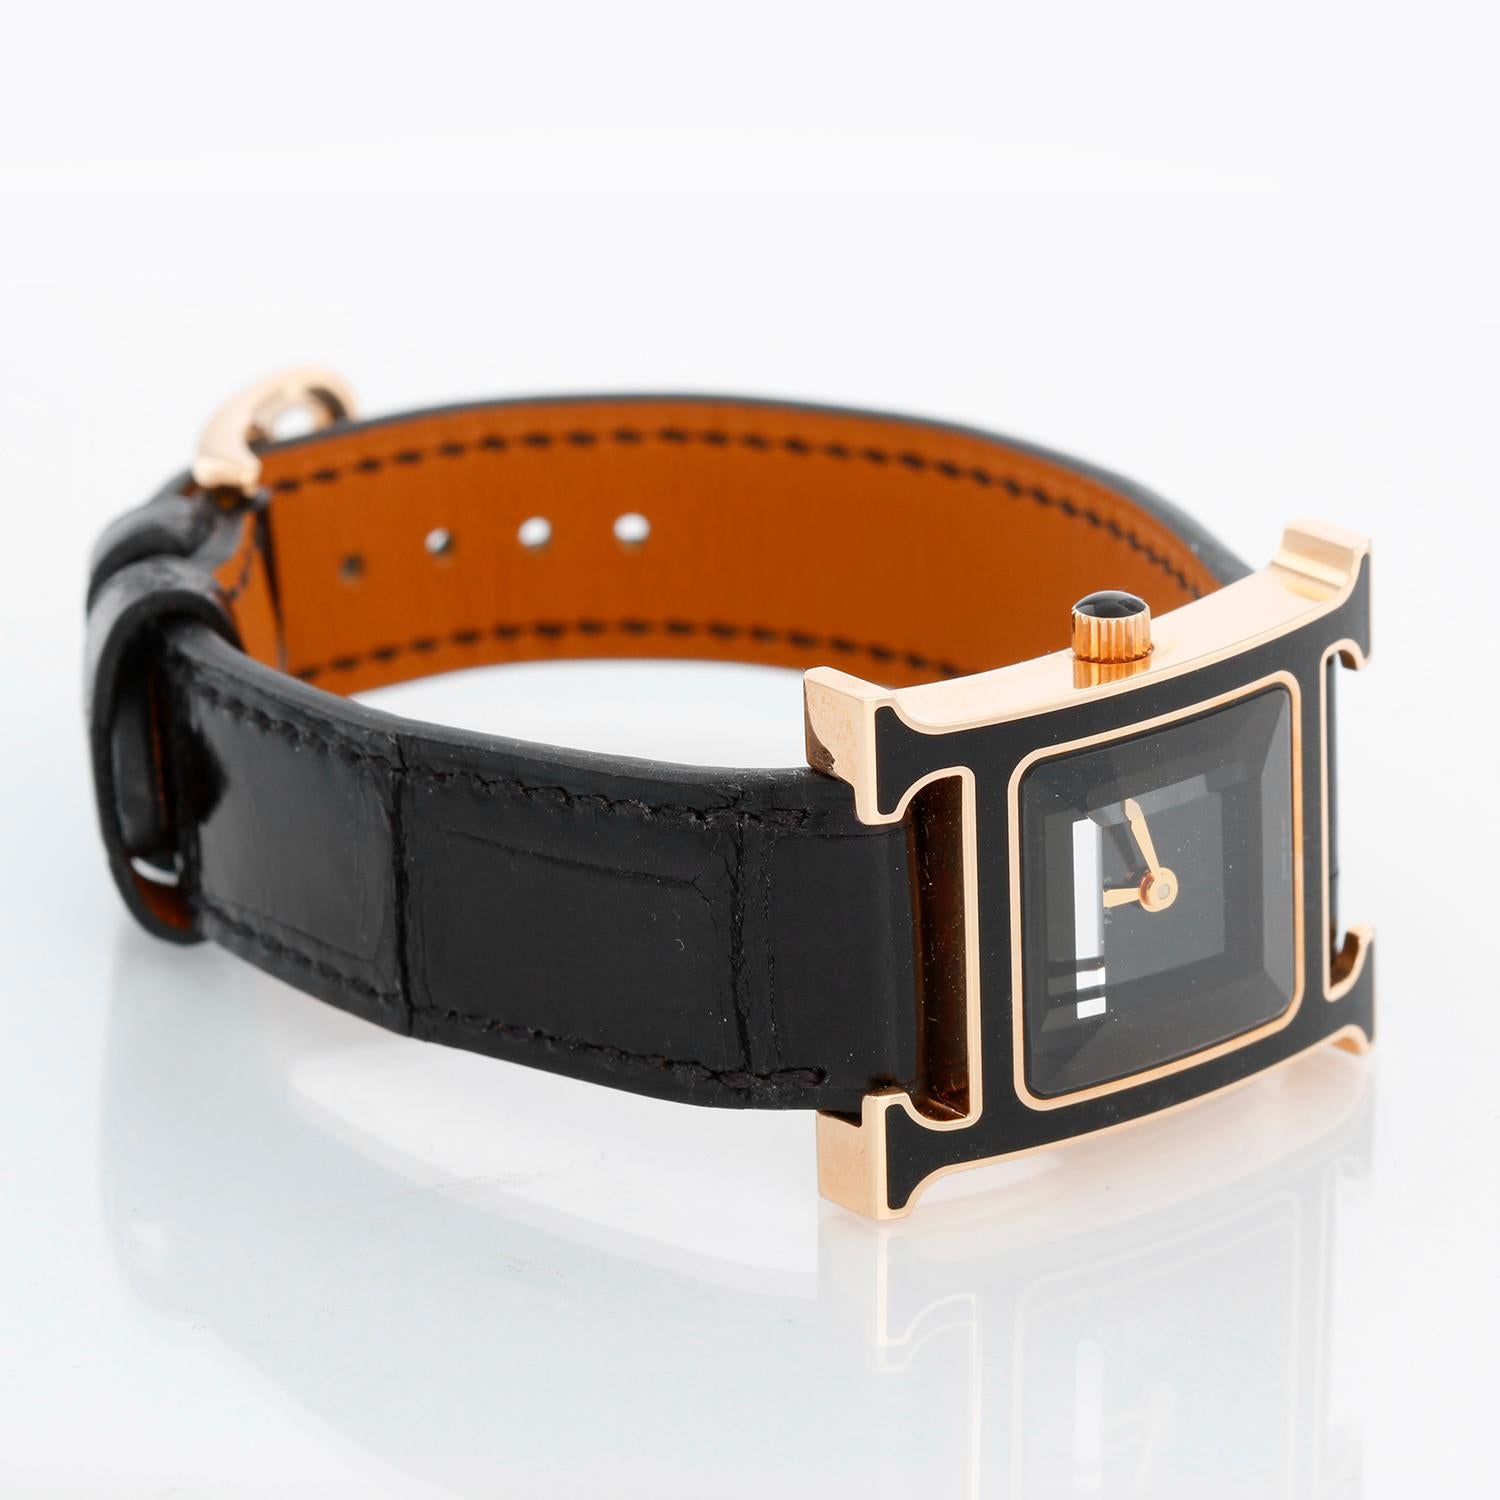 Hermes Heure H 18k Rose Gold Ladies Watch HH1.2706 - Quartz. 18K rose gold ( 25  x 30  mm ). Black dial with faceted crystal . Black alligator strap with tang buckle. Pre-owned with Hermes box and papers .